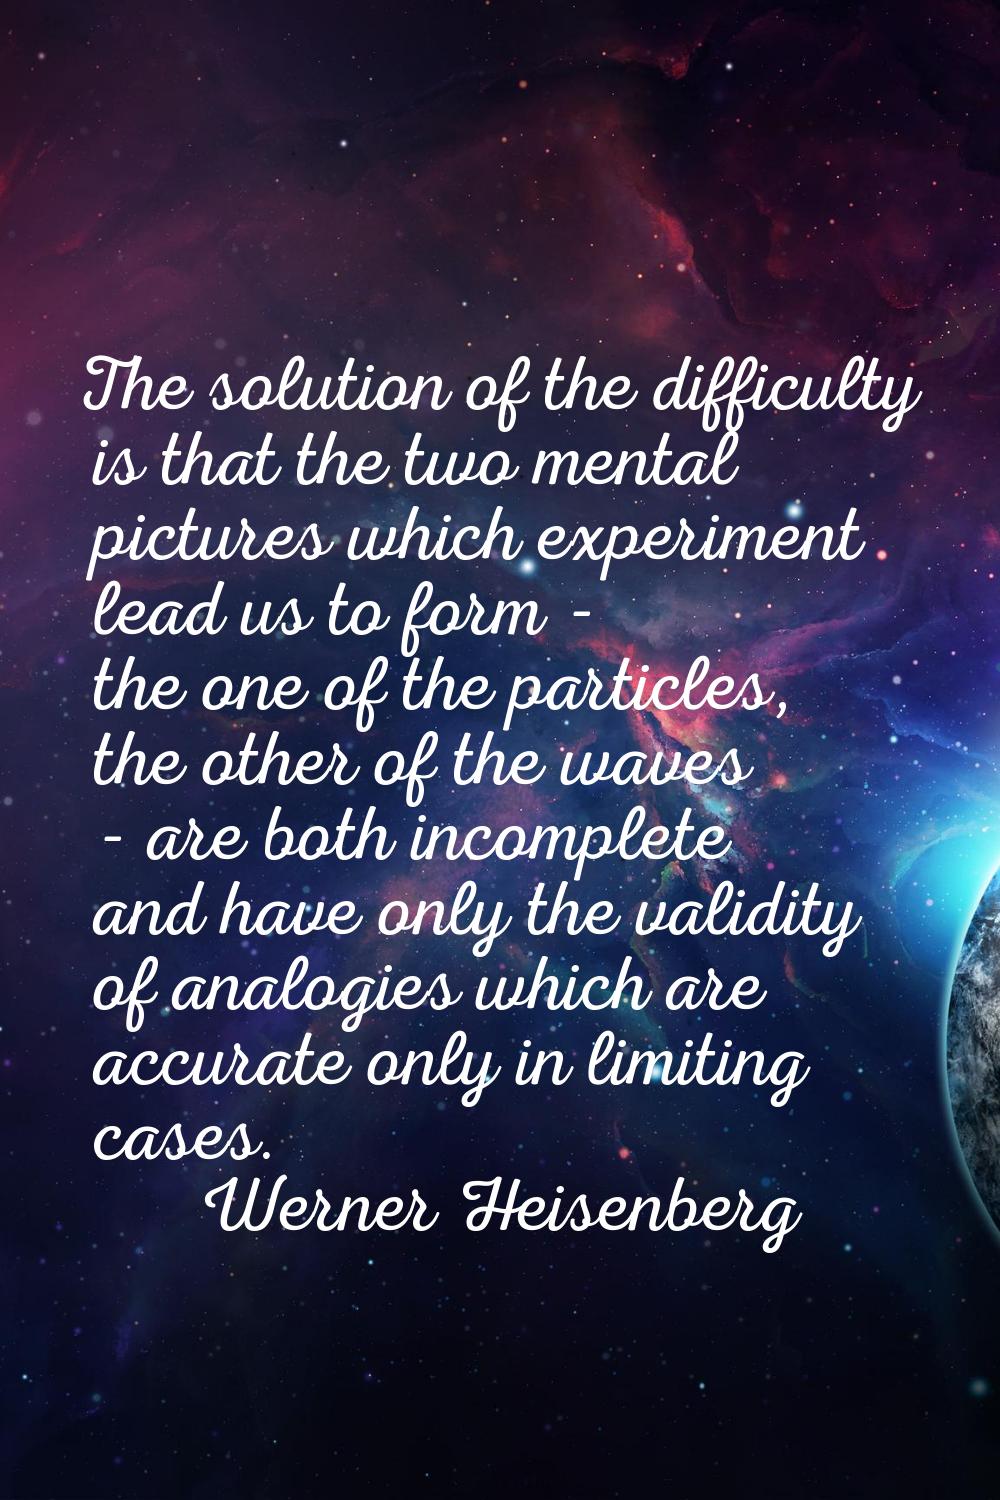 The solution of the difficulty is that the two mental pictures which experiment lead us to form - t